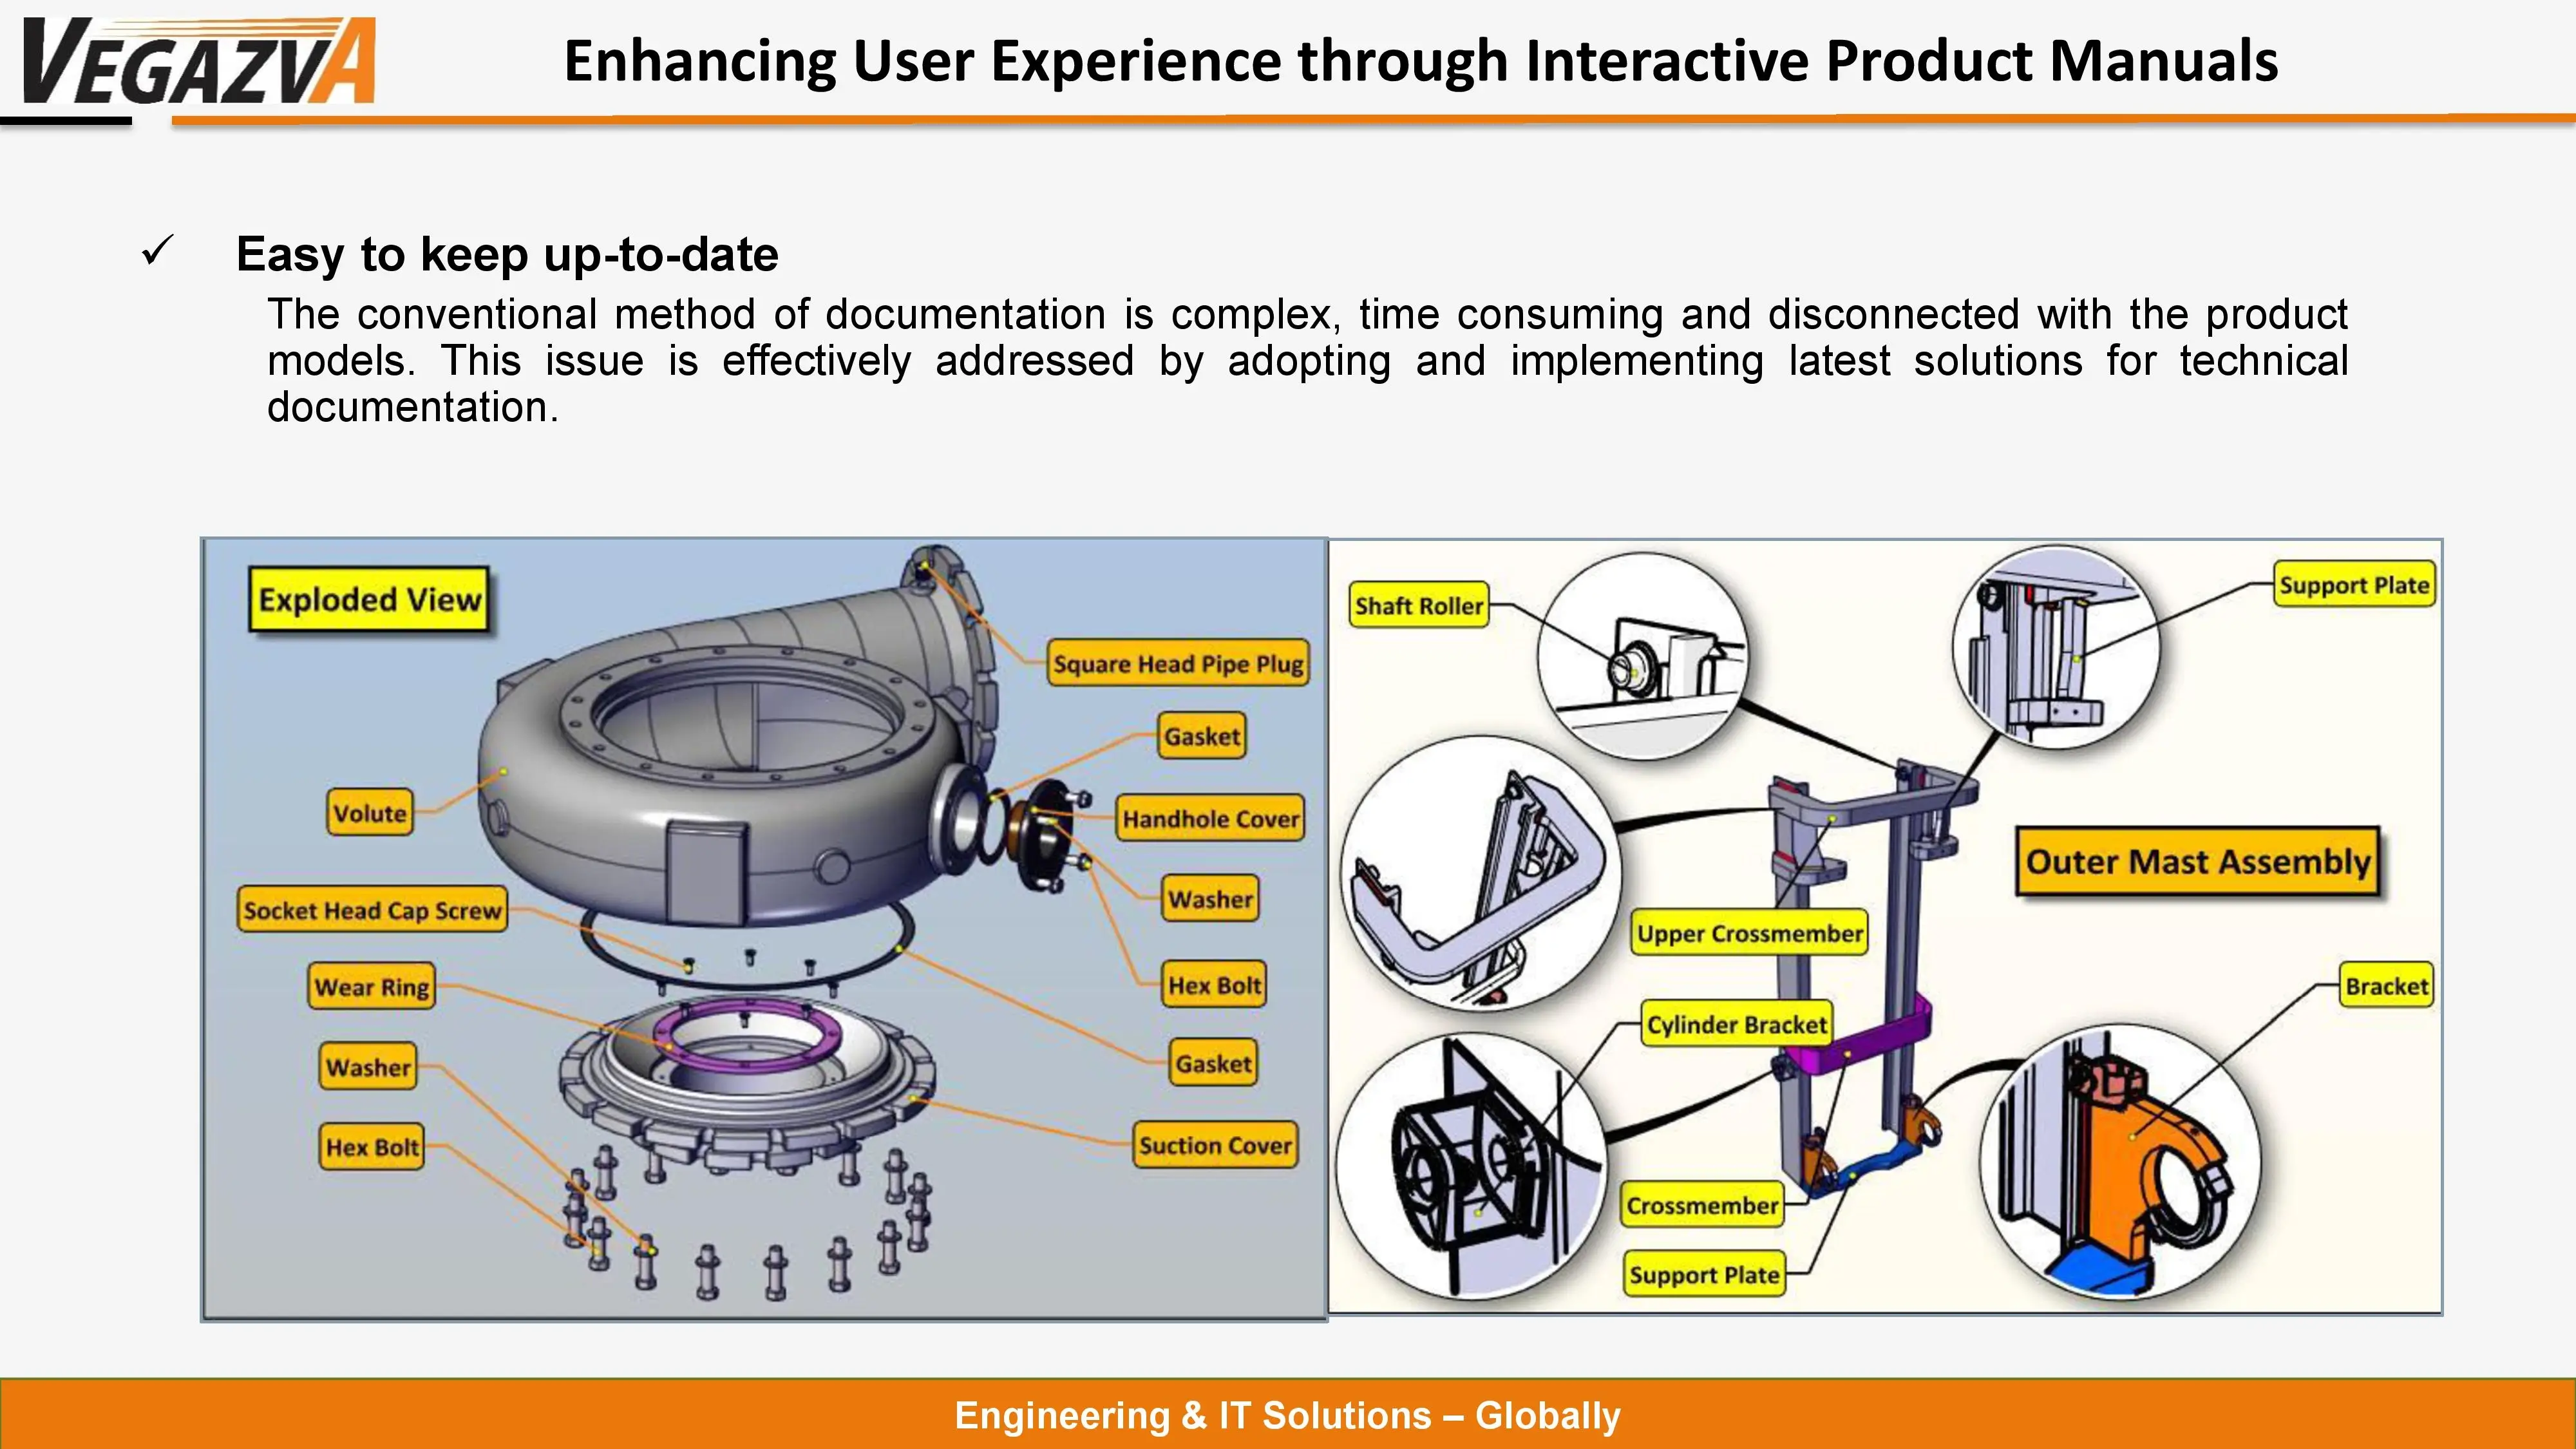 Signature Project - Enhancing User Experience through Interactive Product Manuals